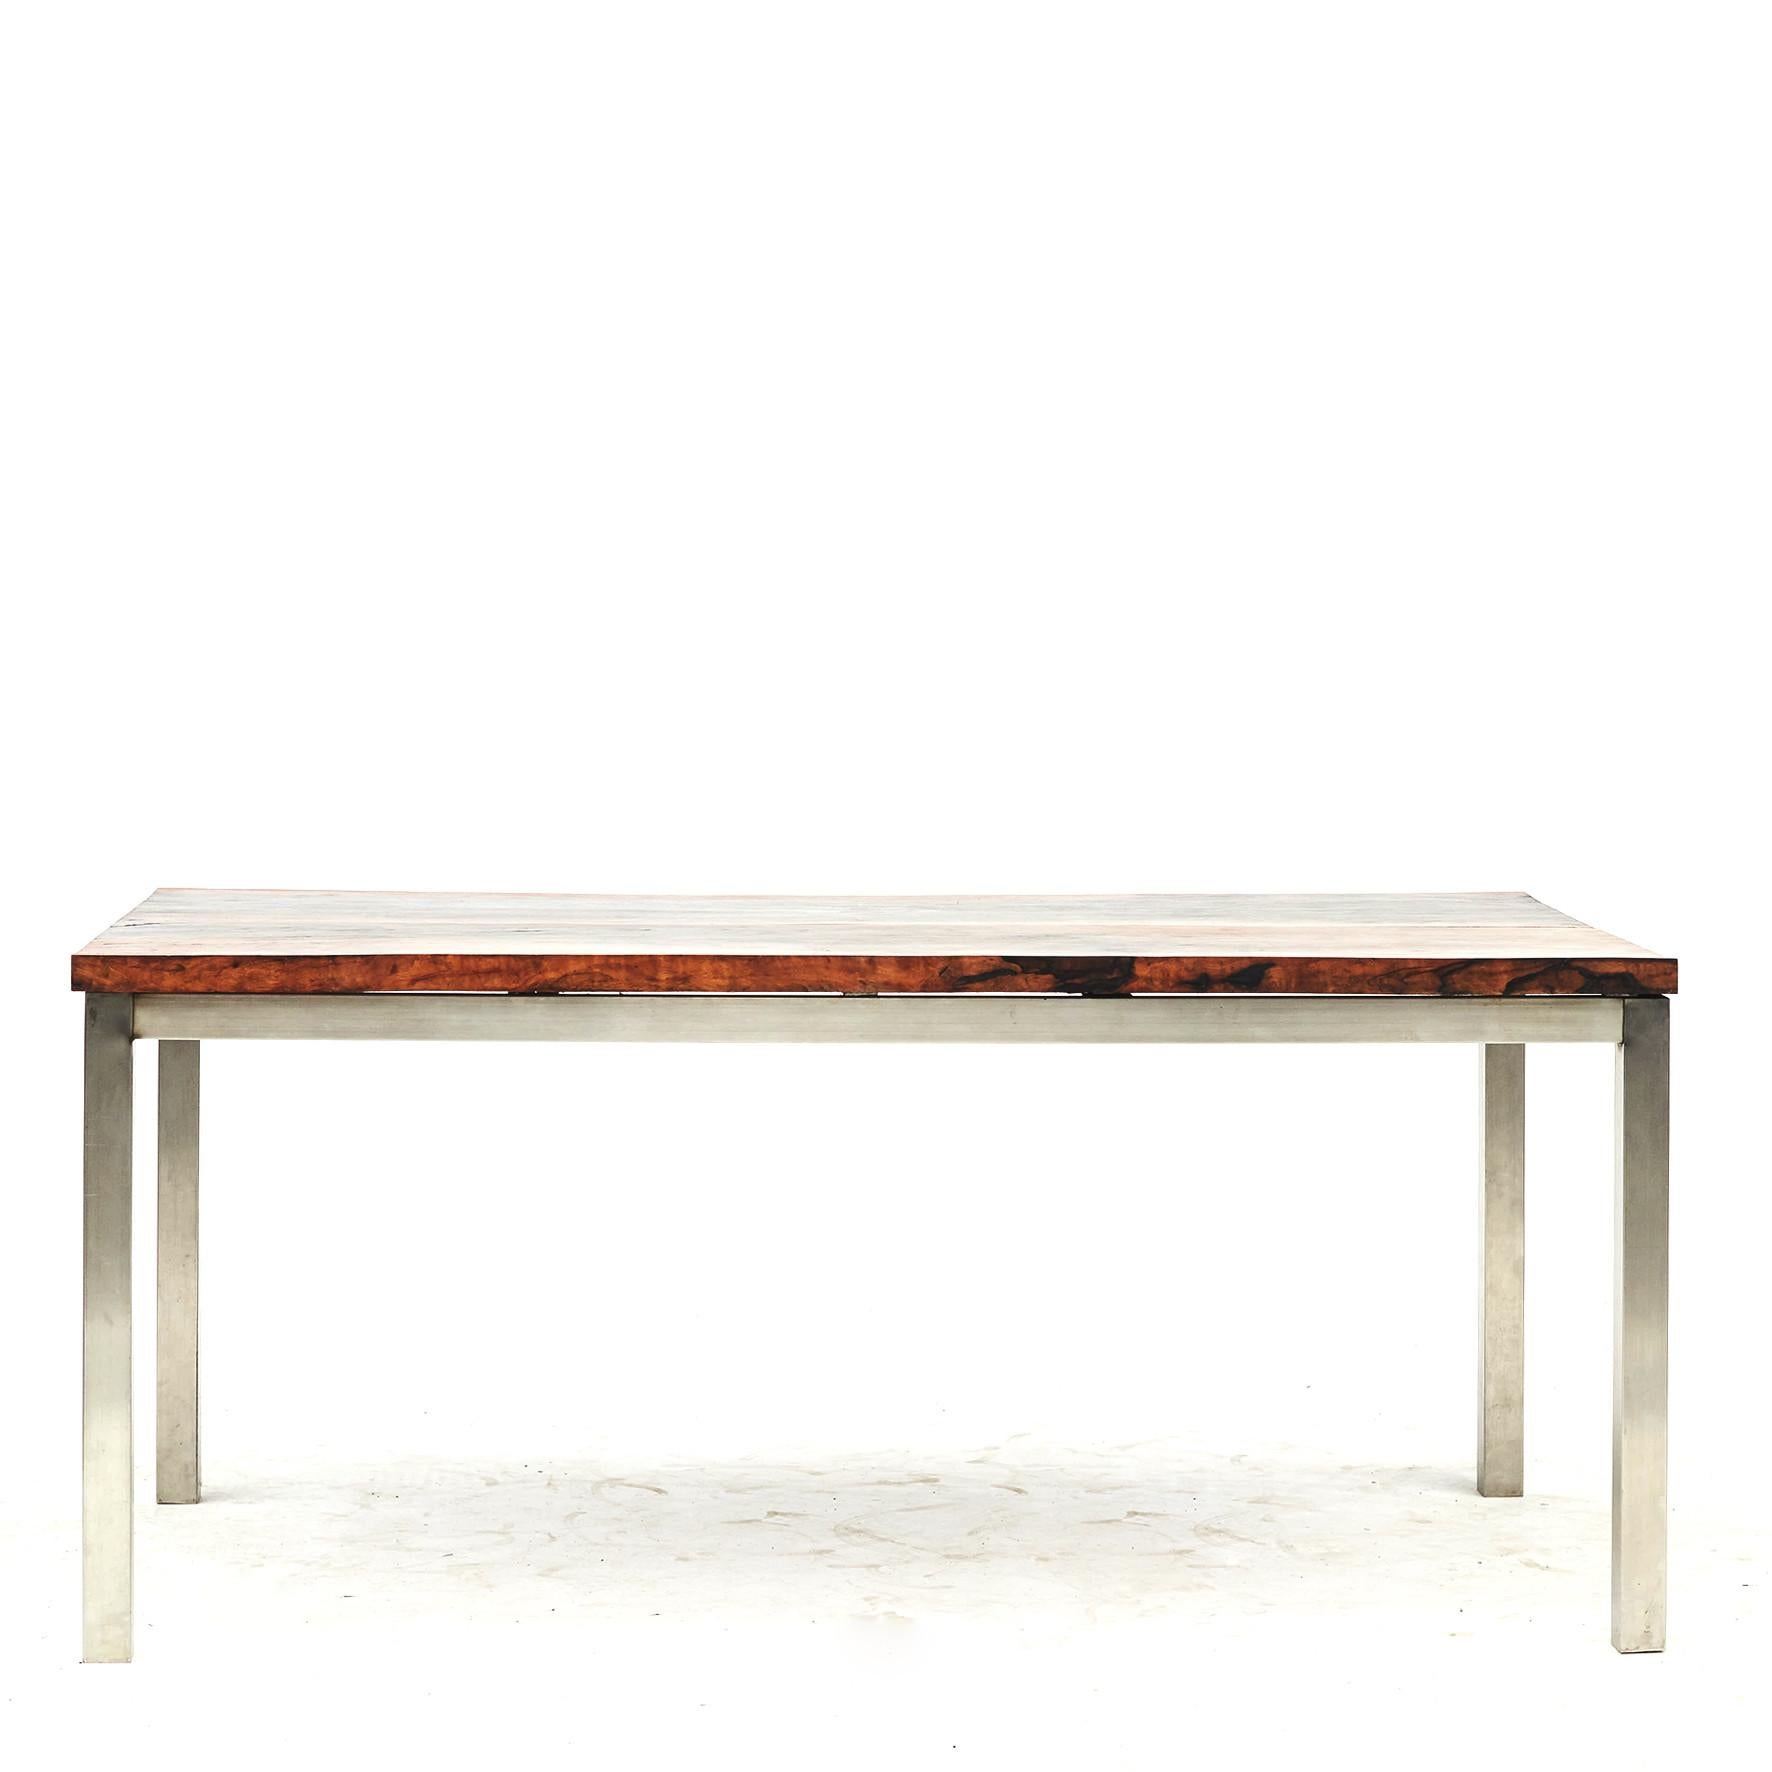 Rectangular dining table.
The top is made from two old pieces of Narra hardwood with beautiful grain.
Base of brass / chrome which gives it an industrial edge.

Narra is the national tree of the Philippines and a tropical hardwood tree, often